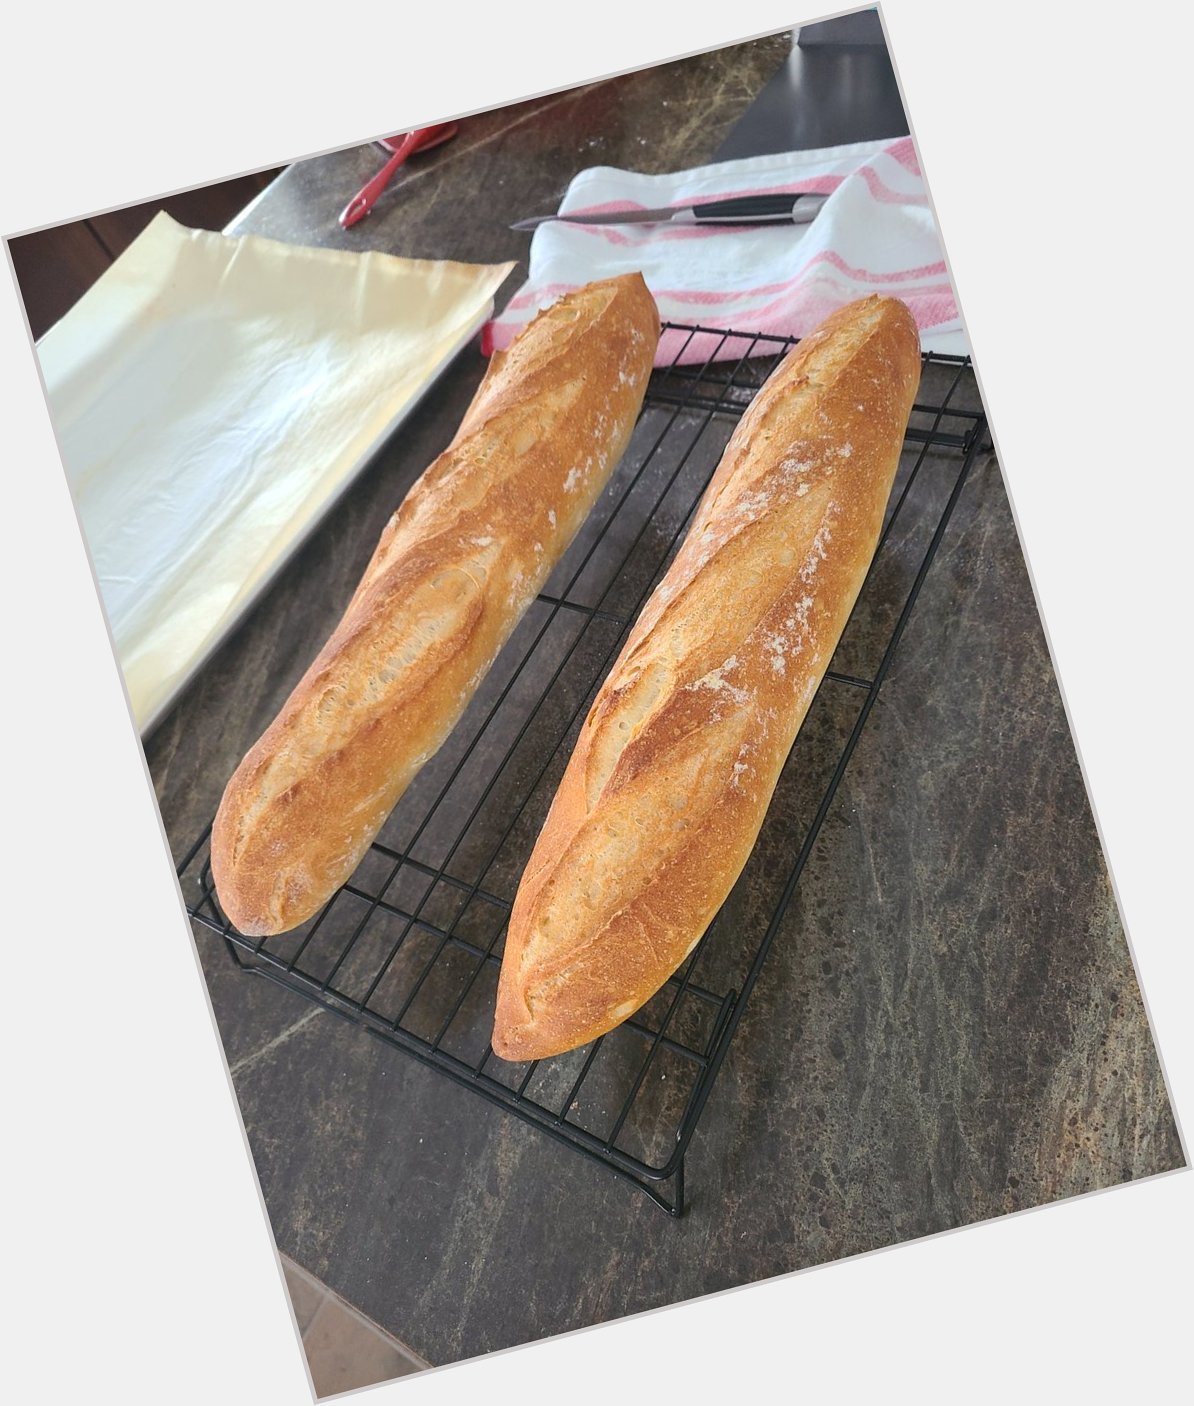 Happy birthday, Harry Kane. I made you baguettes. I will eat them for you as well. 